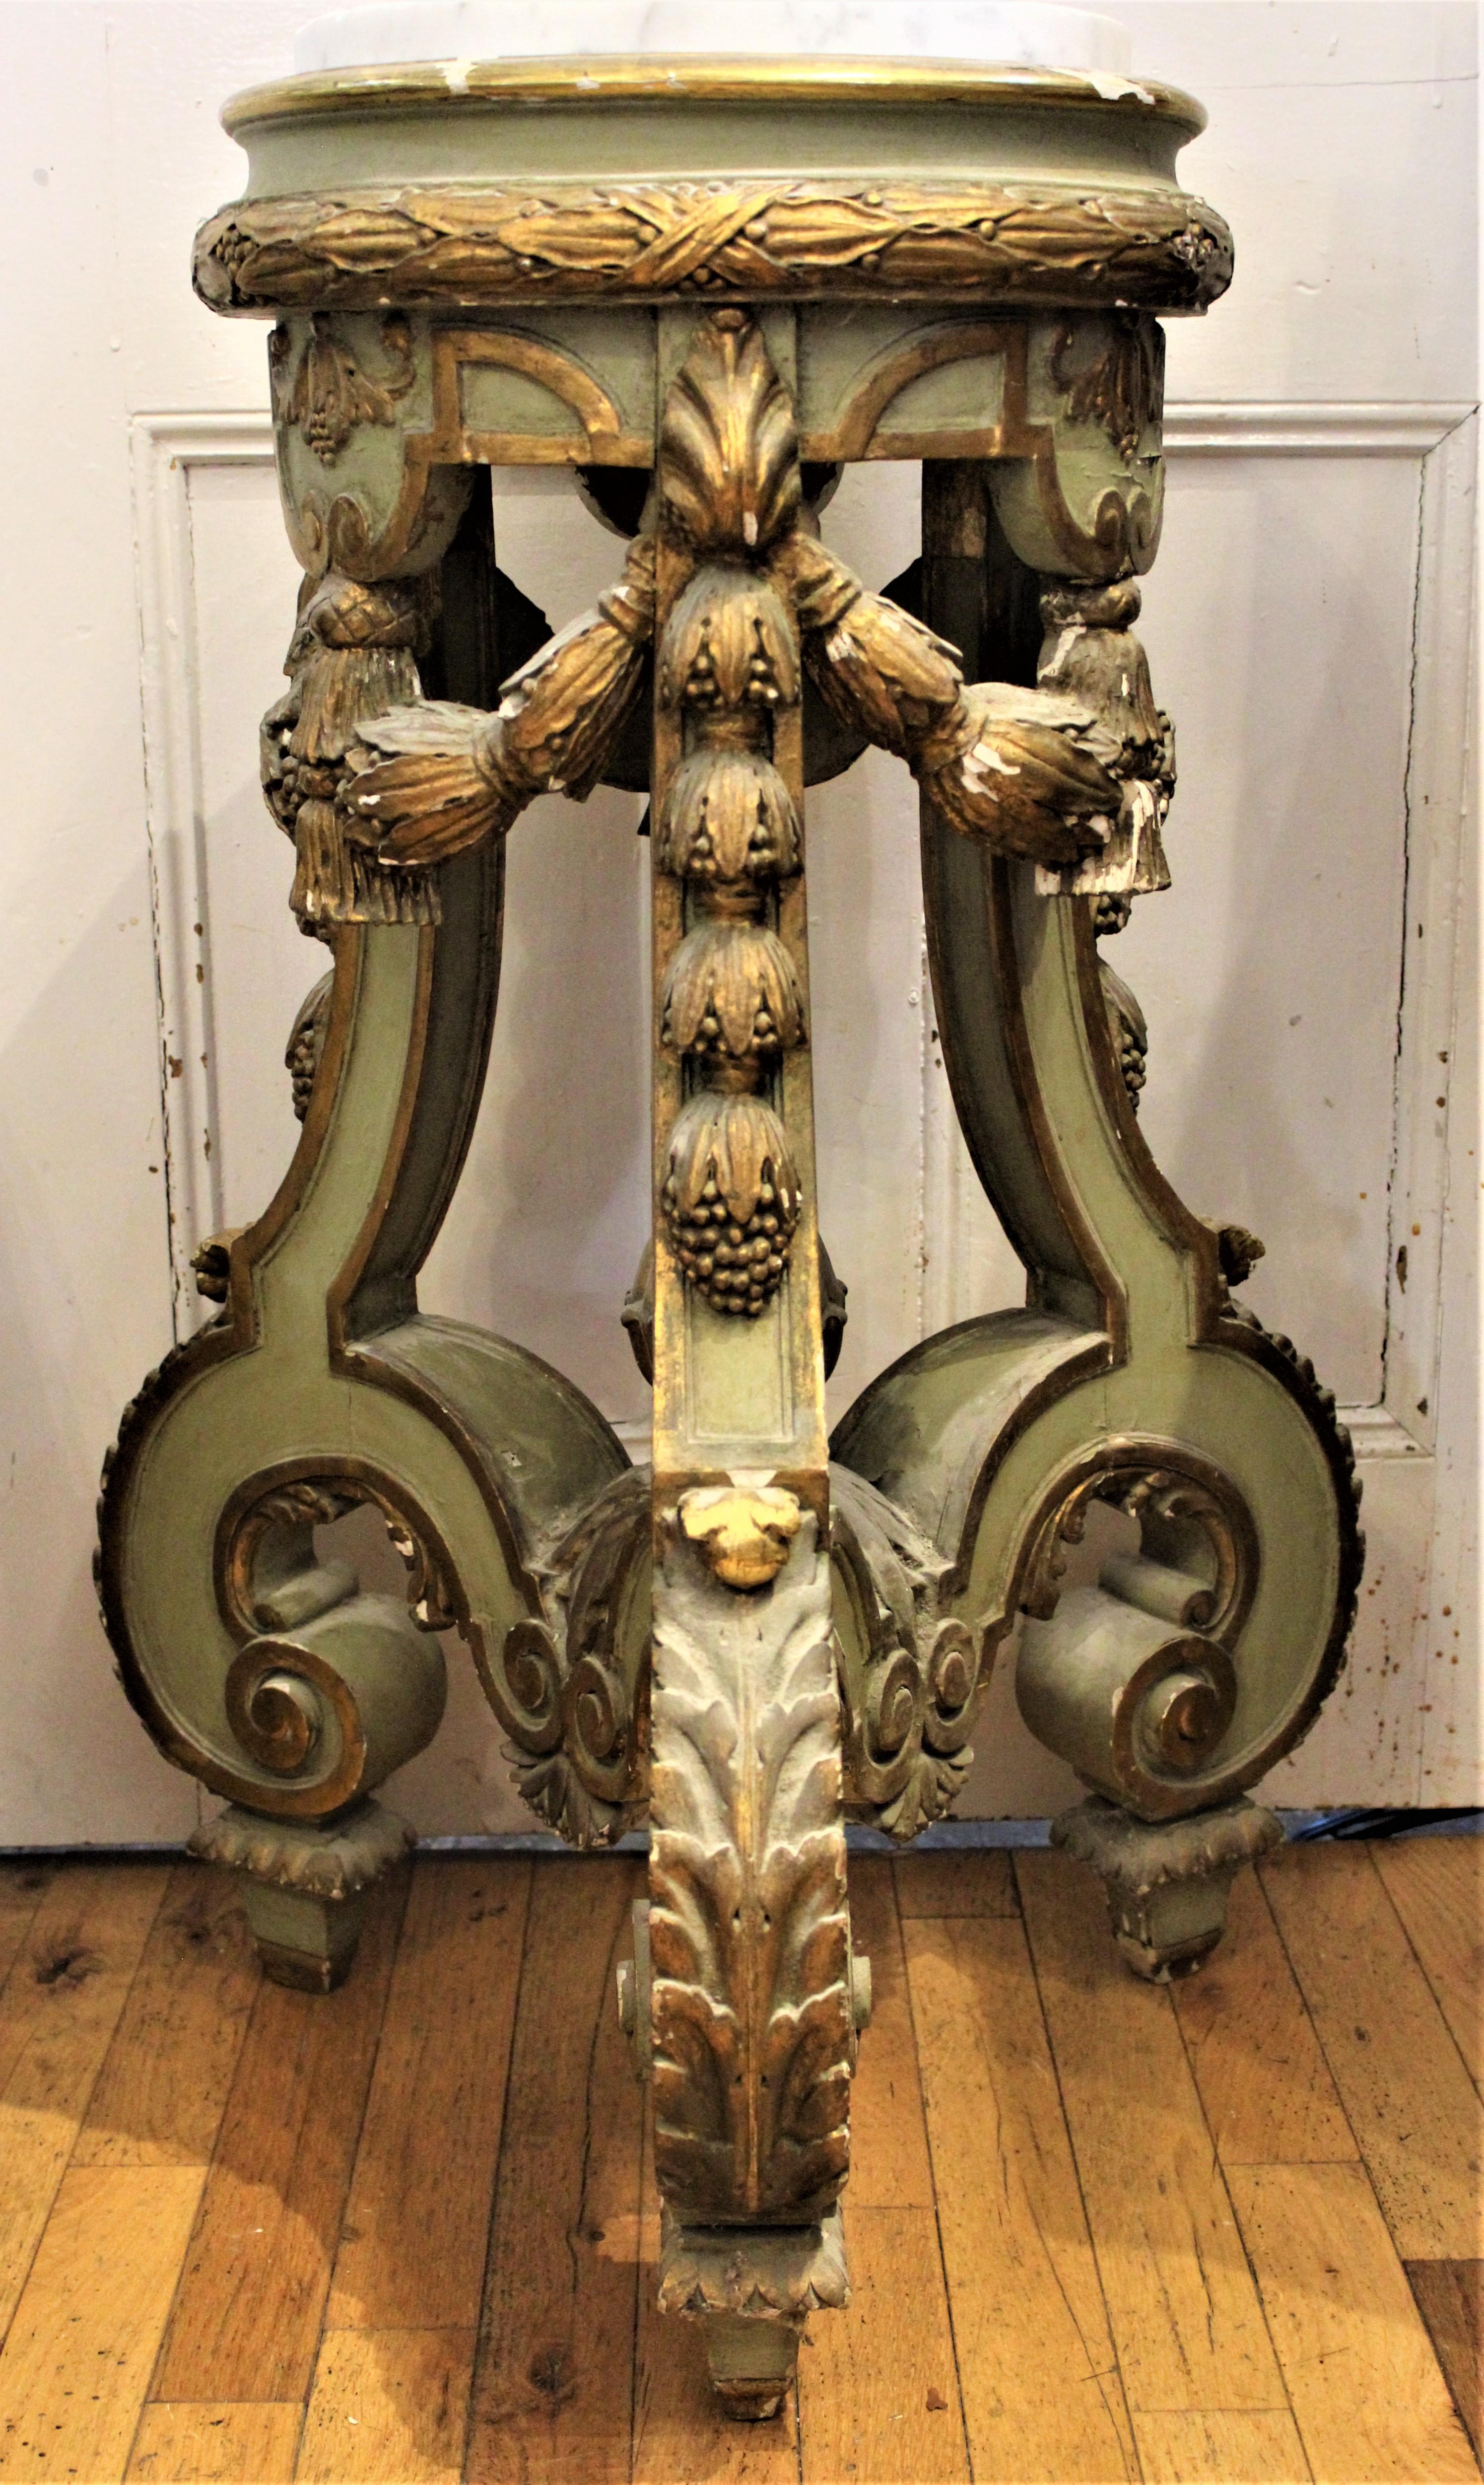 Done in the Rococo style and dating from the mid-19th century, this substantial hand carved and painted gesso over wood pedestal presents with a ball motif decoration cascading down each of the thick serpentine shaped legs and finishing with a